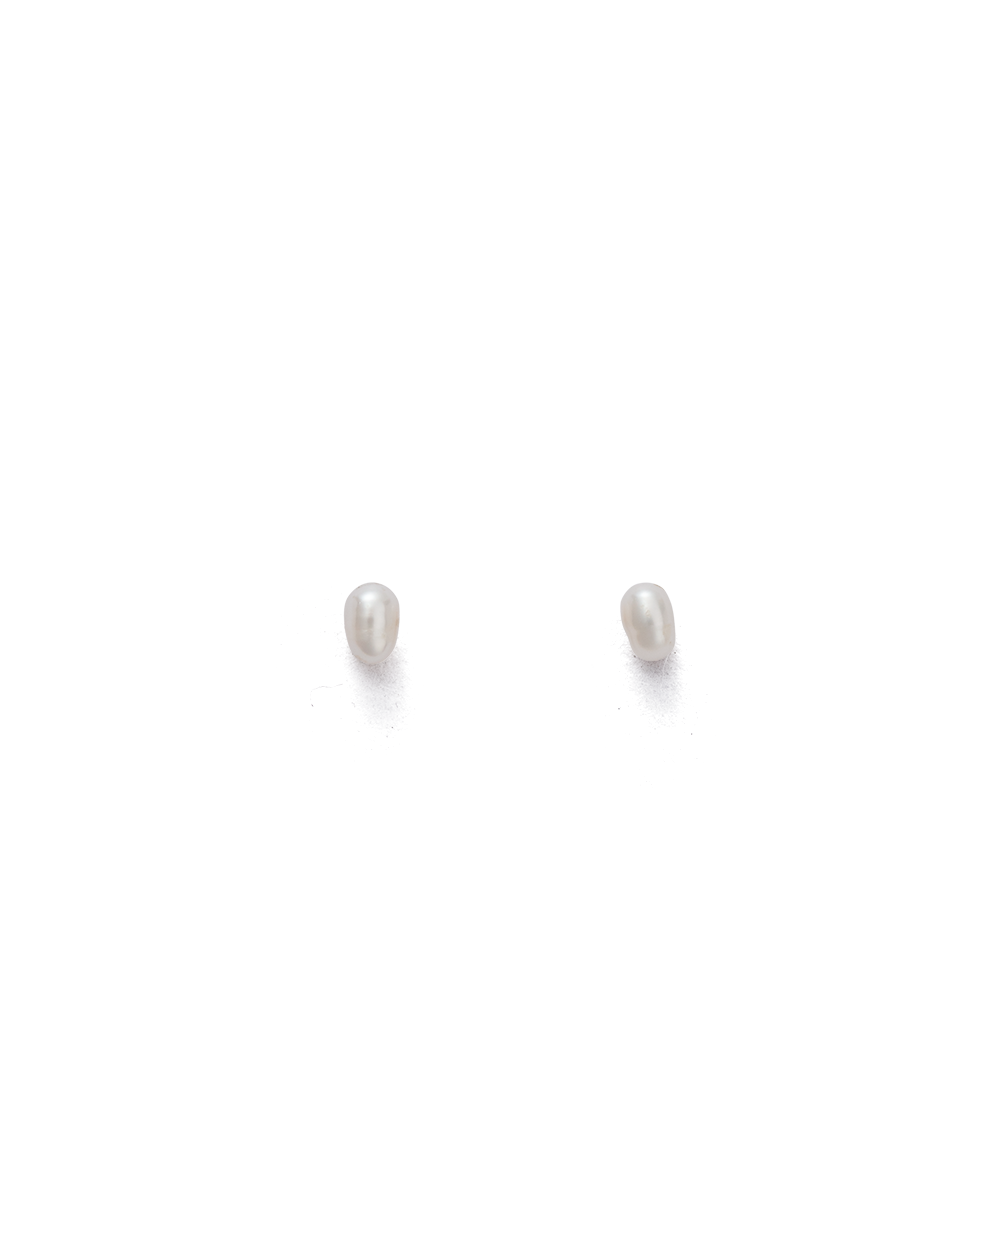 VACATION PEARL STUDS (STERLING SILVER)